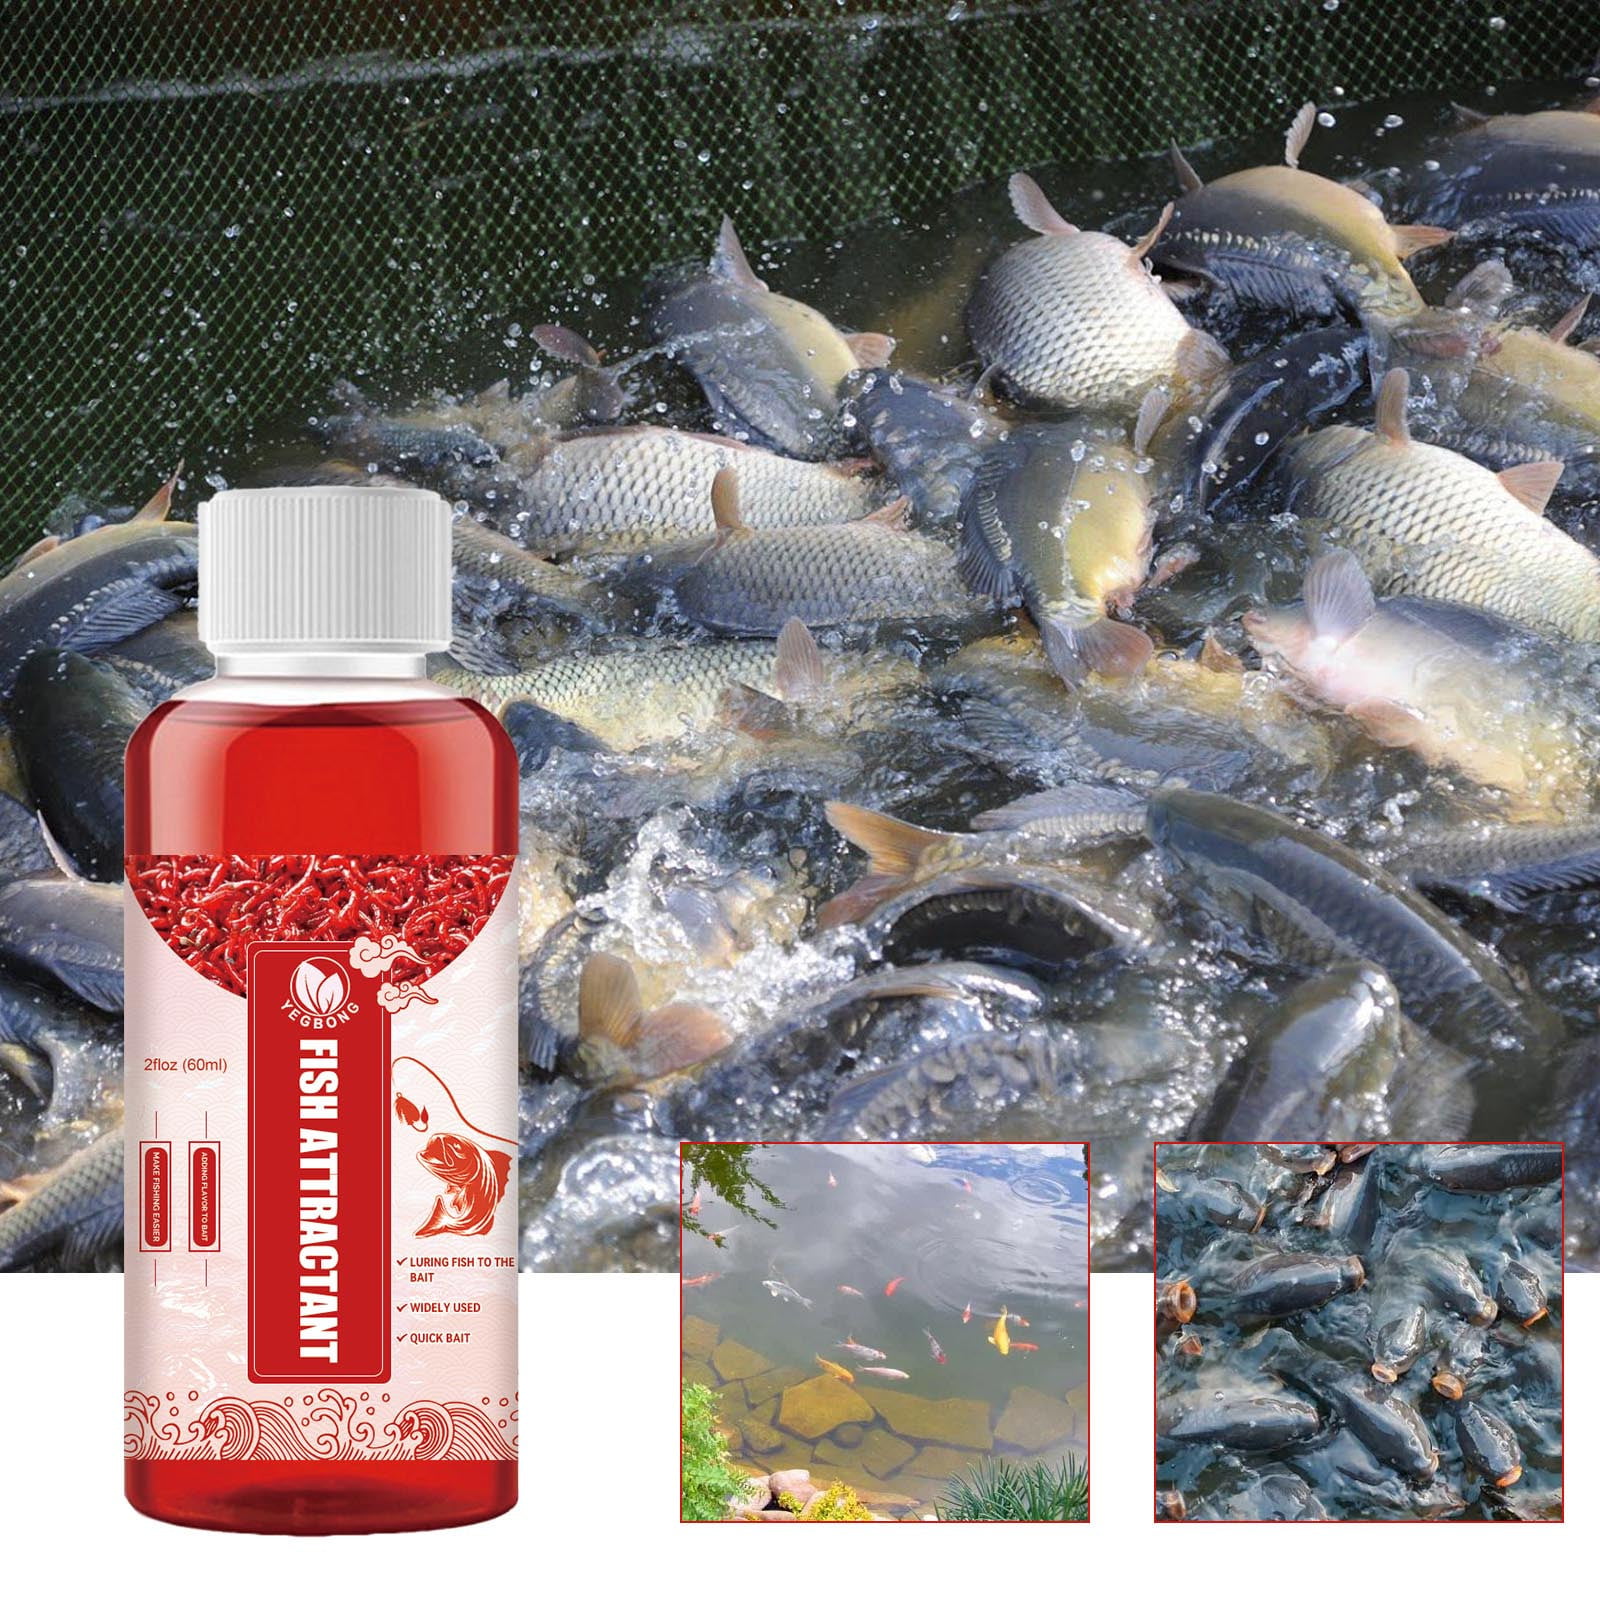 Fishing Bait Additive Fish Attractant Concentrated Red Worm Liquid Hig